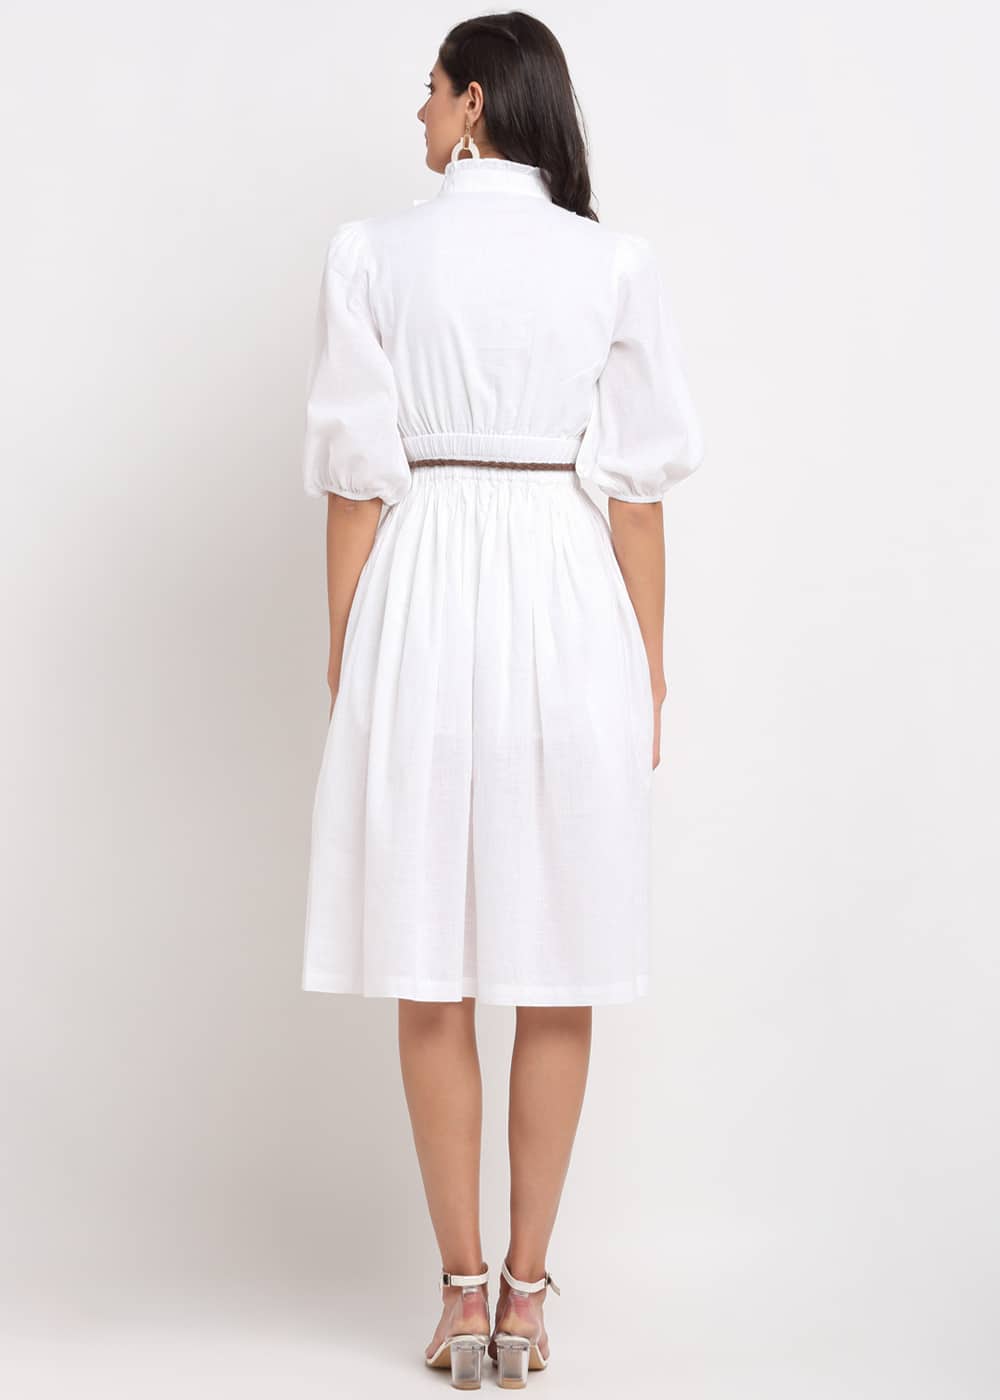 White Dress With Brown Belt